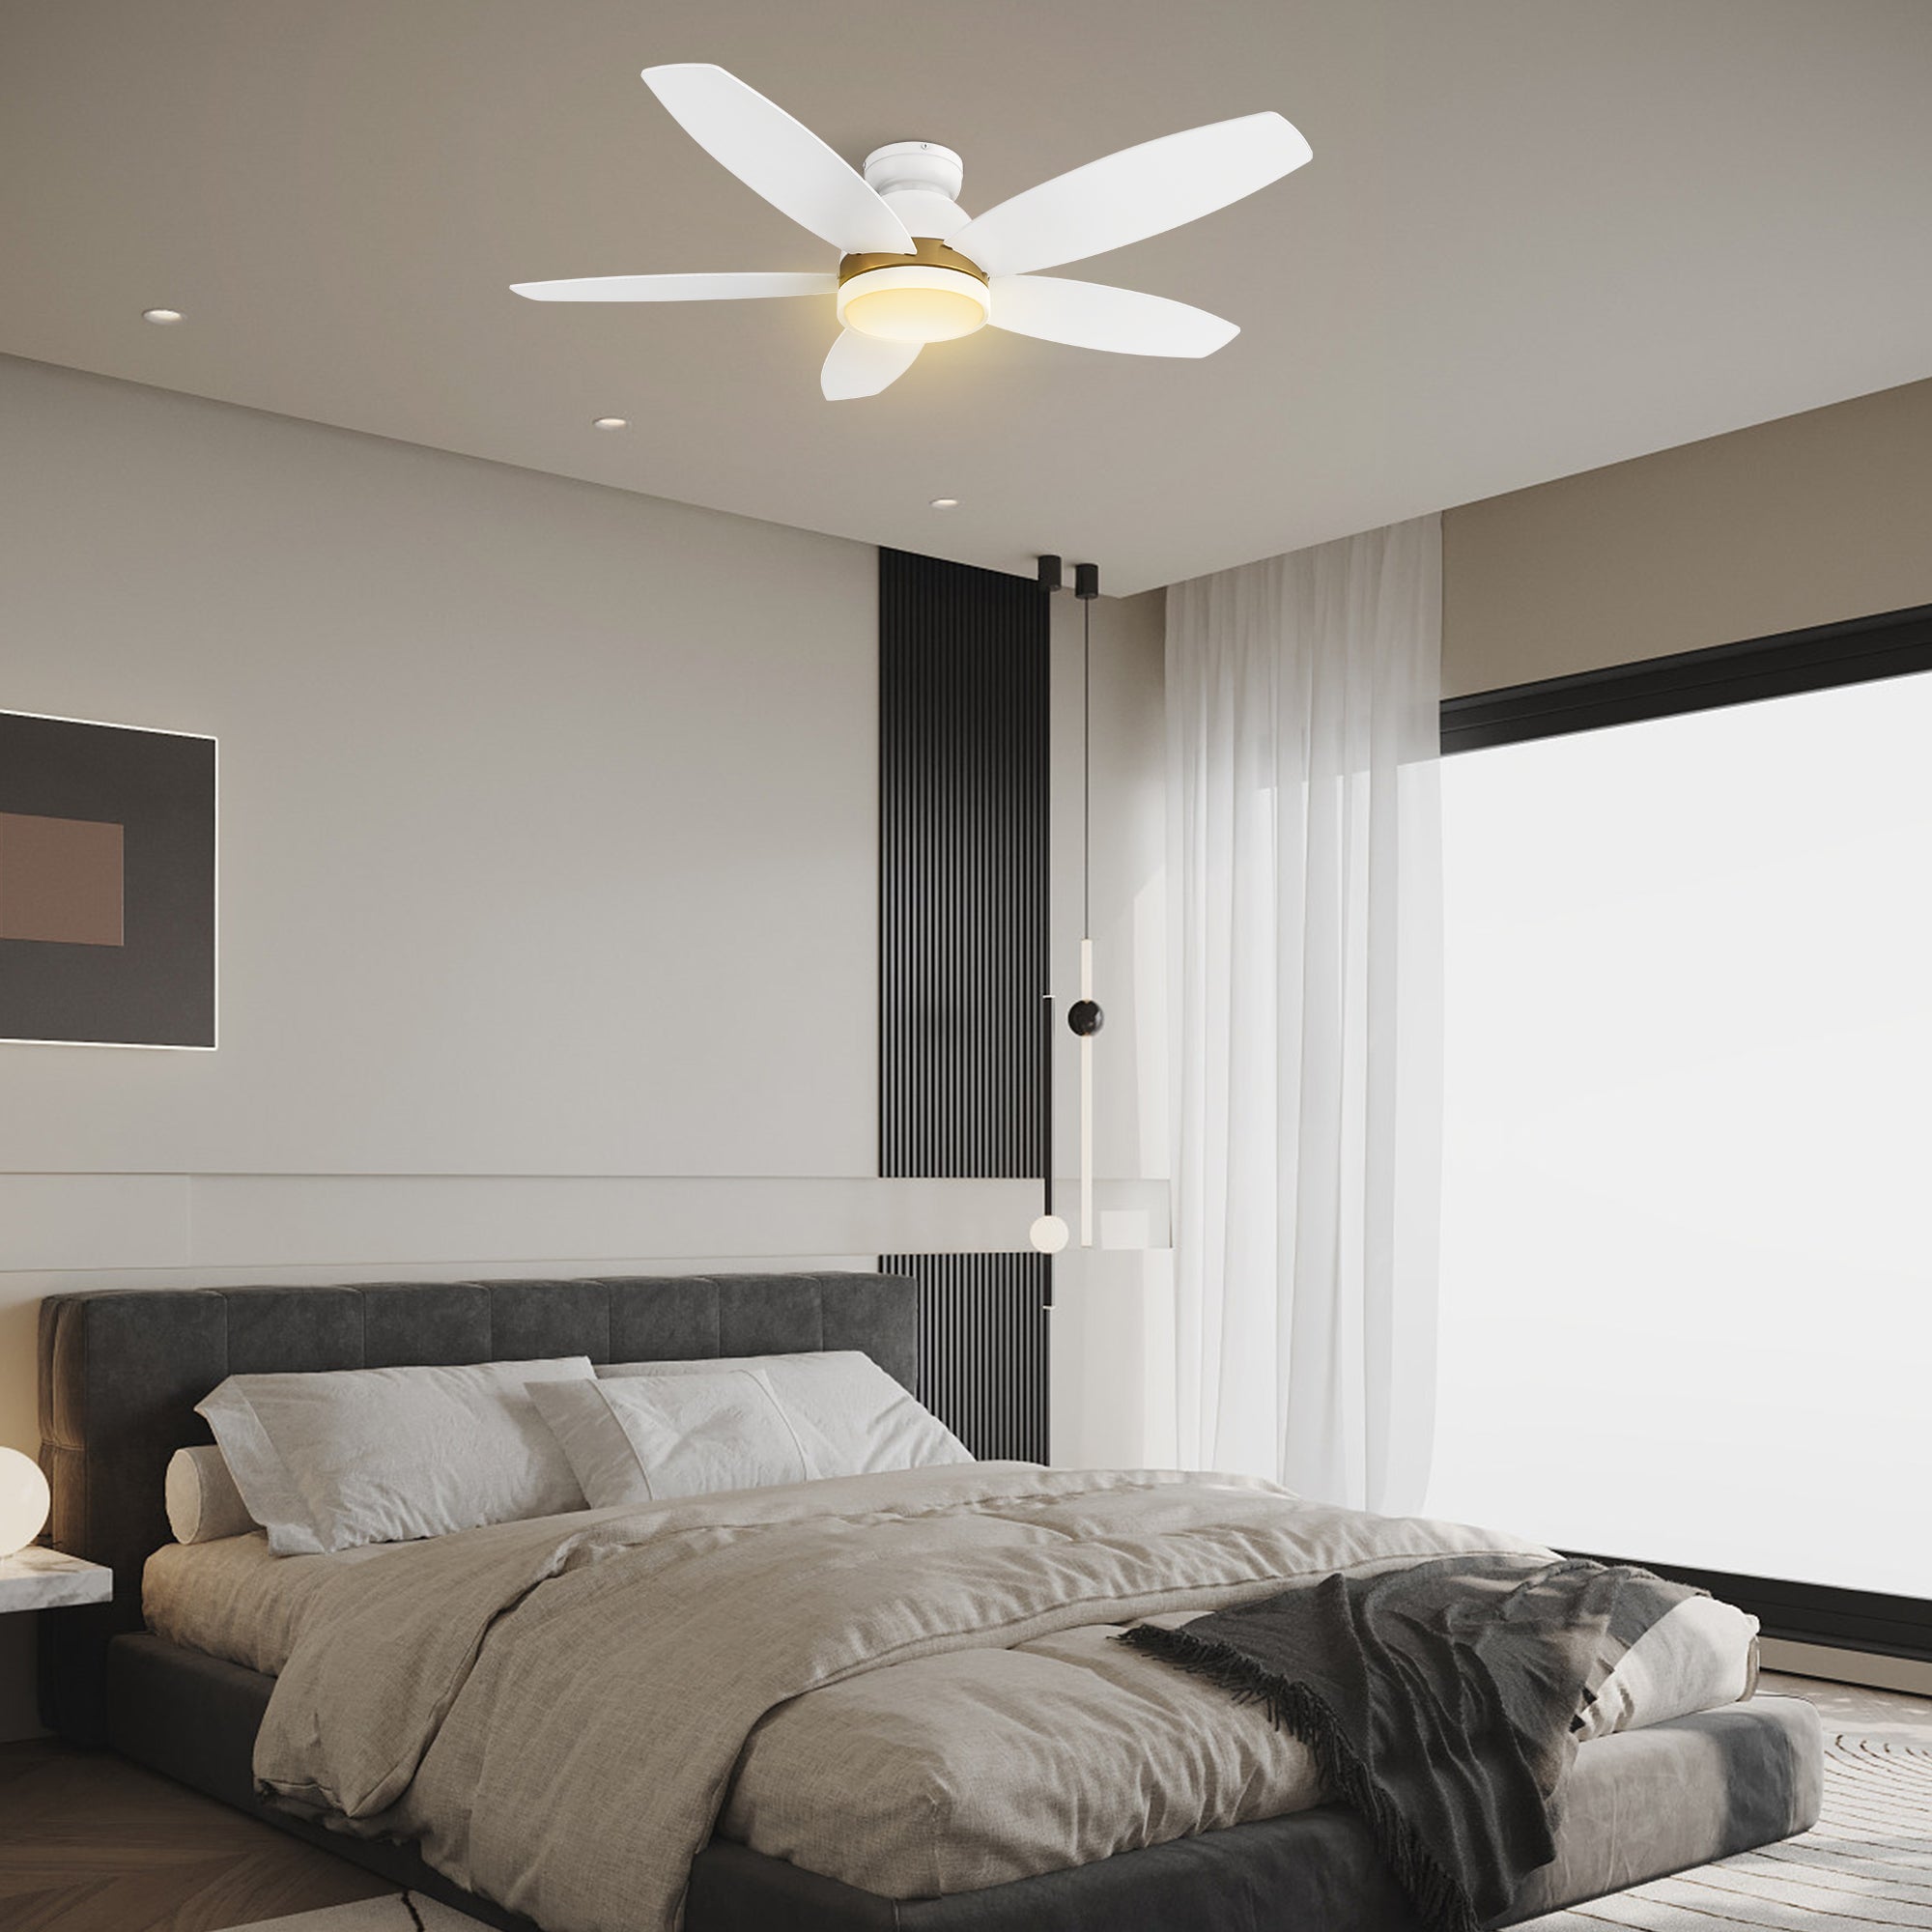 This Levi 48&#39;&#39; smart ceiling fan keeps your space cool, bright, and stylish. It is a soft modern masterpiece perfect for your large indoor living spaces. The fan features Remote control, Wi-Fi apps, Siri Shortcut and Voice control technology (compatible with Amazon Alexa and Google Home Assistant ) to set fan preferences. 